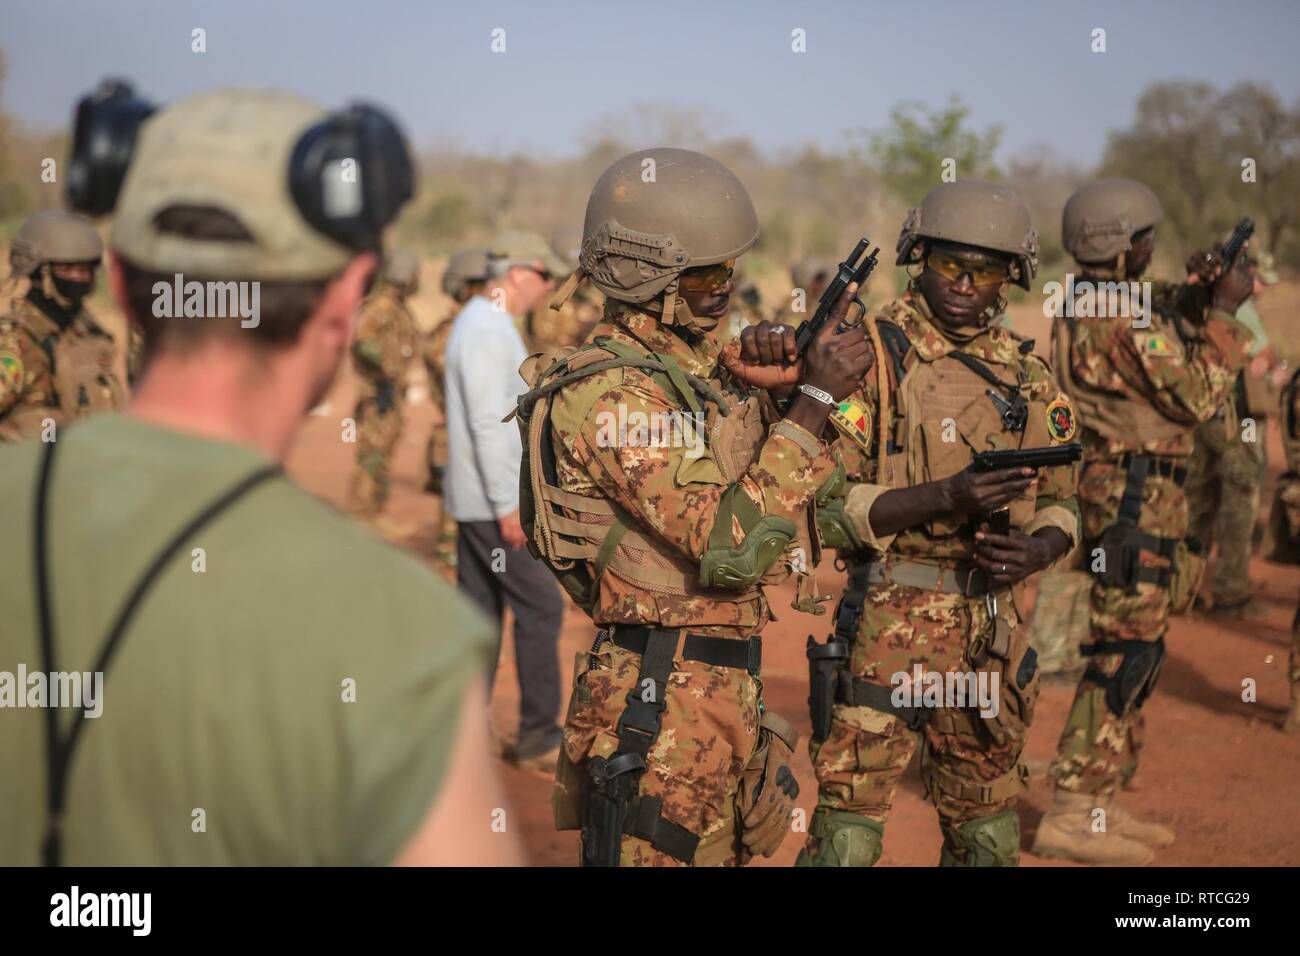 A Czech Special Forces Soldier observes Malian soldiers as they clear M9 pistols during a live fire range near Loumbila, Burkina Faso Feb. 17, 2019. The training event is part of exercise Flintlock 19 and ensures the Malian Soldiers are proficient with their weapons. Flintlock is U.S. Africa Command's premier and largest special operations forces exercise in Africa. Stock Photo